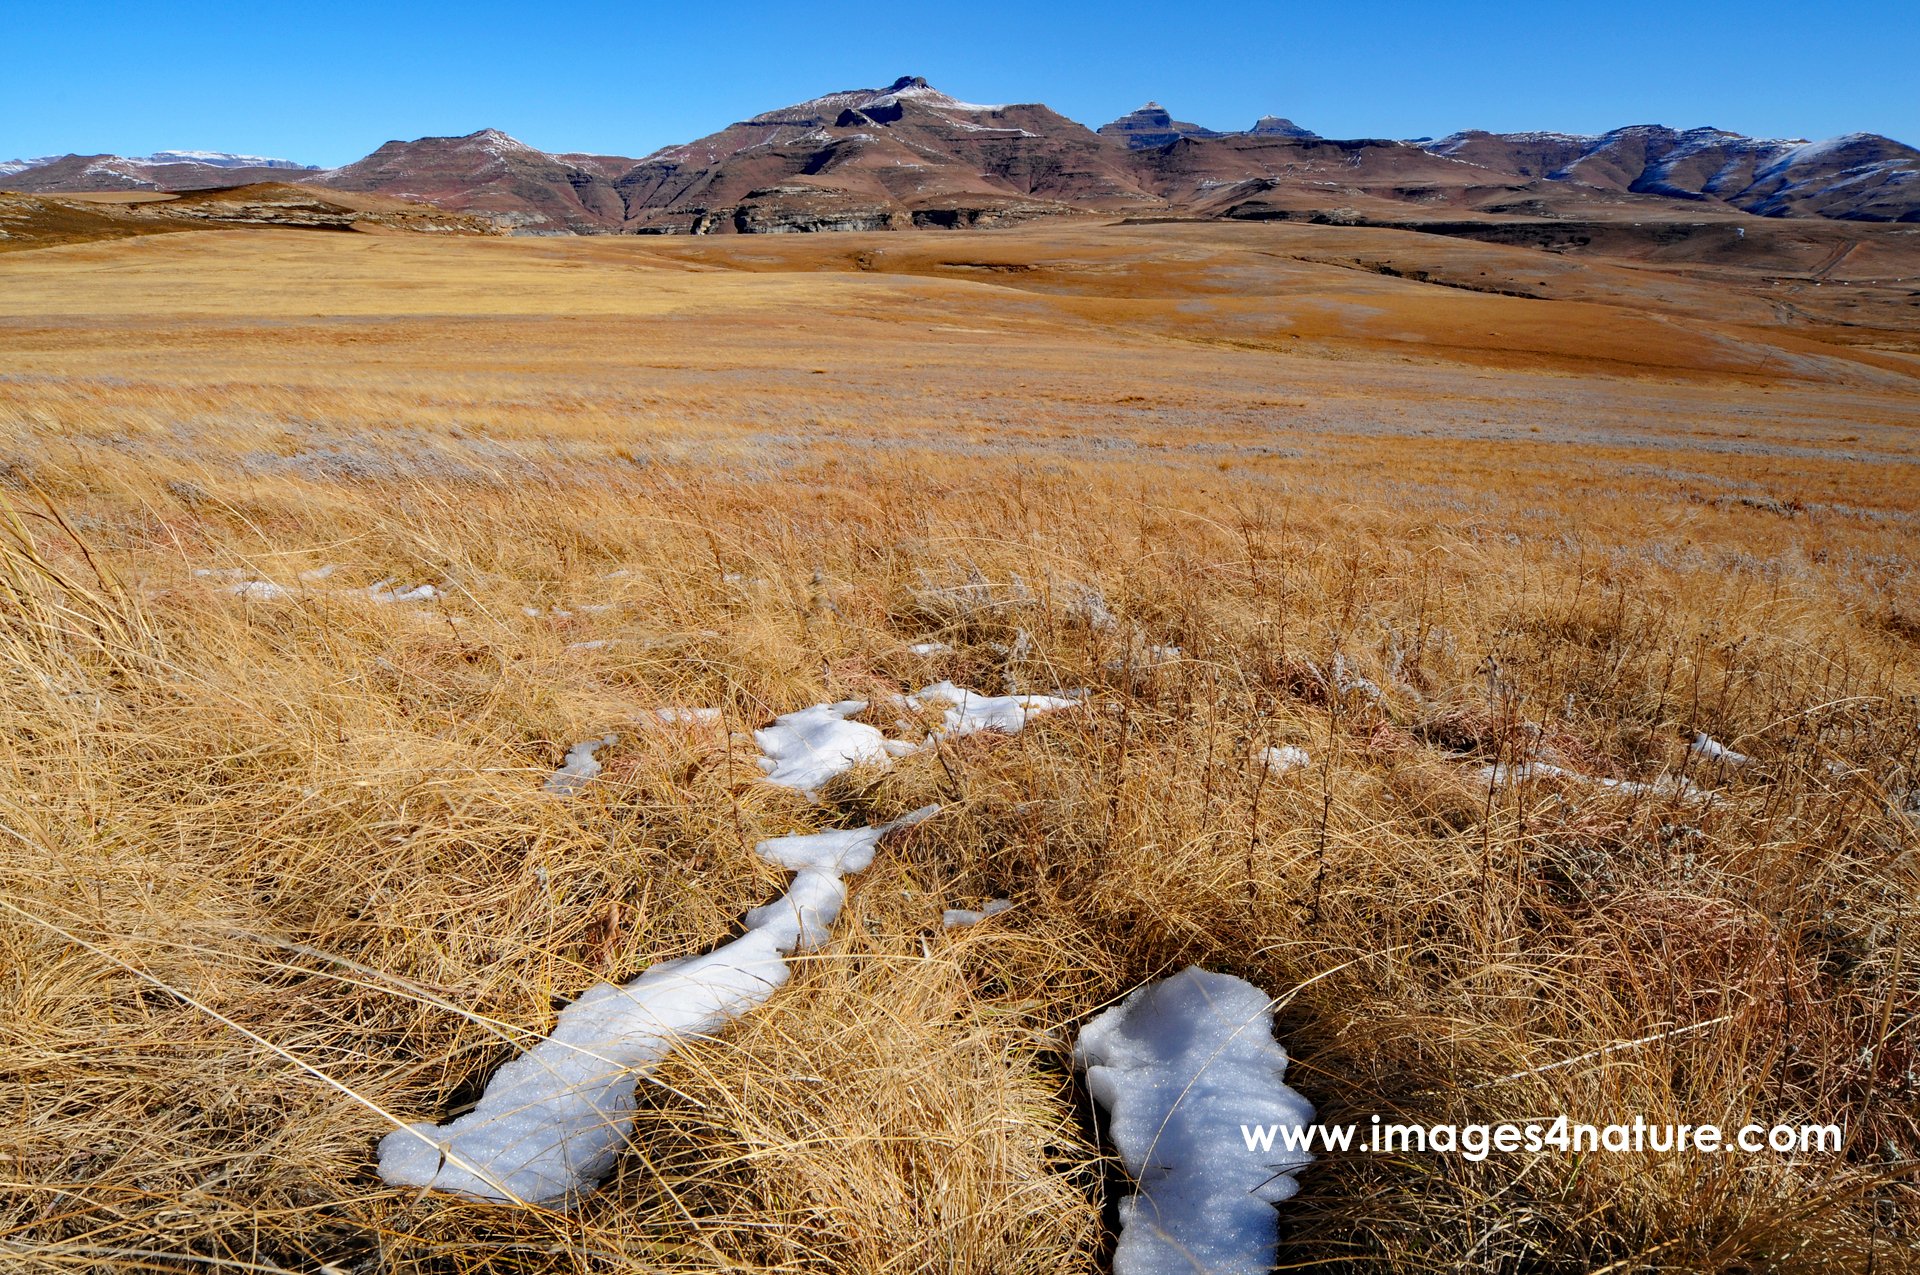 Footstep shaped patches of snow leading into vast grasslands